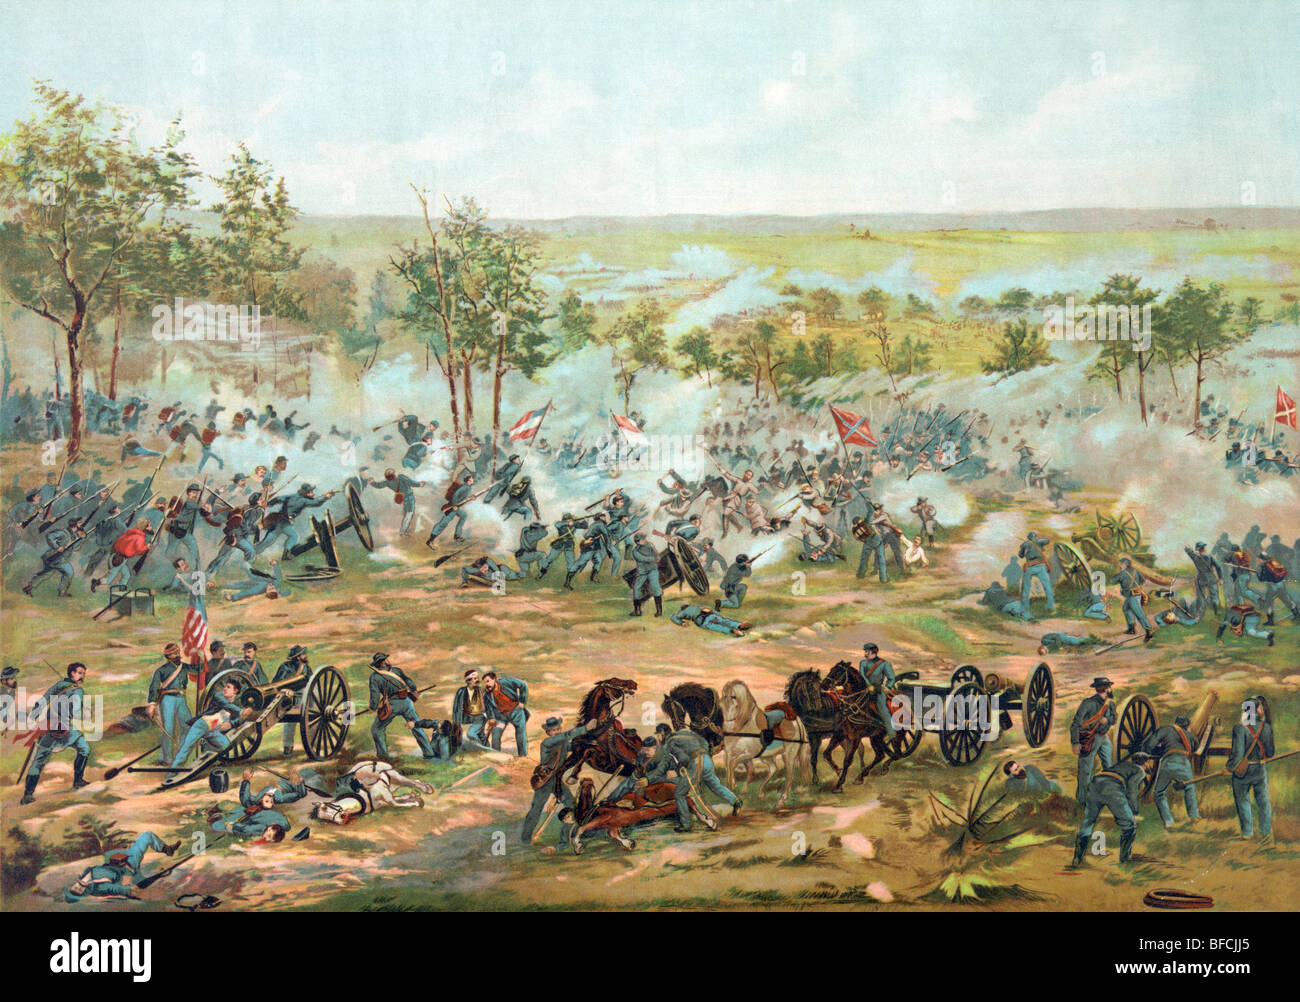 Undated colour print depicting the Battle of Gettysburg (July 1 - 3 1863) during the American Civil War (1861 - 1865). Stock Photo